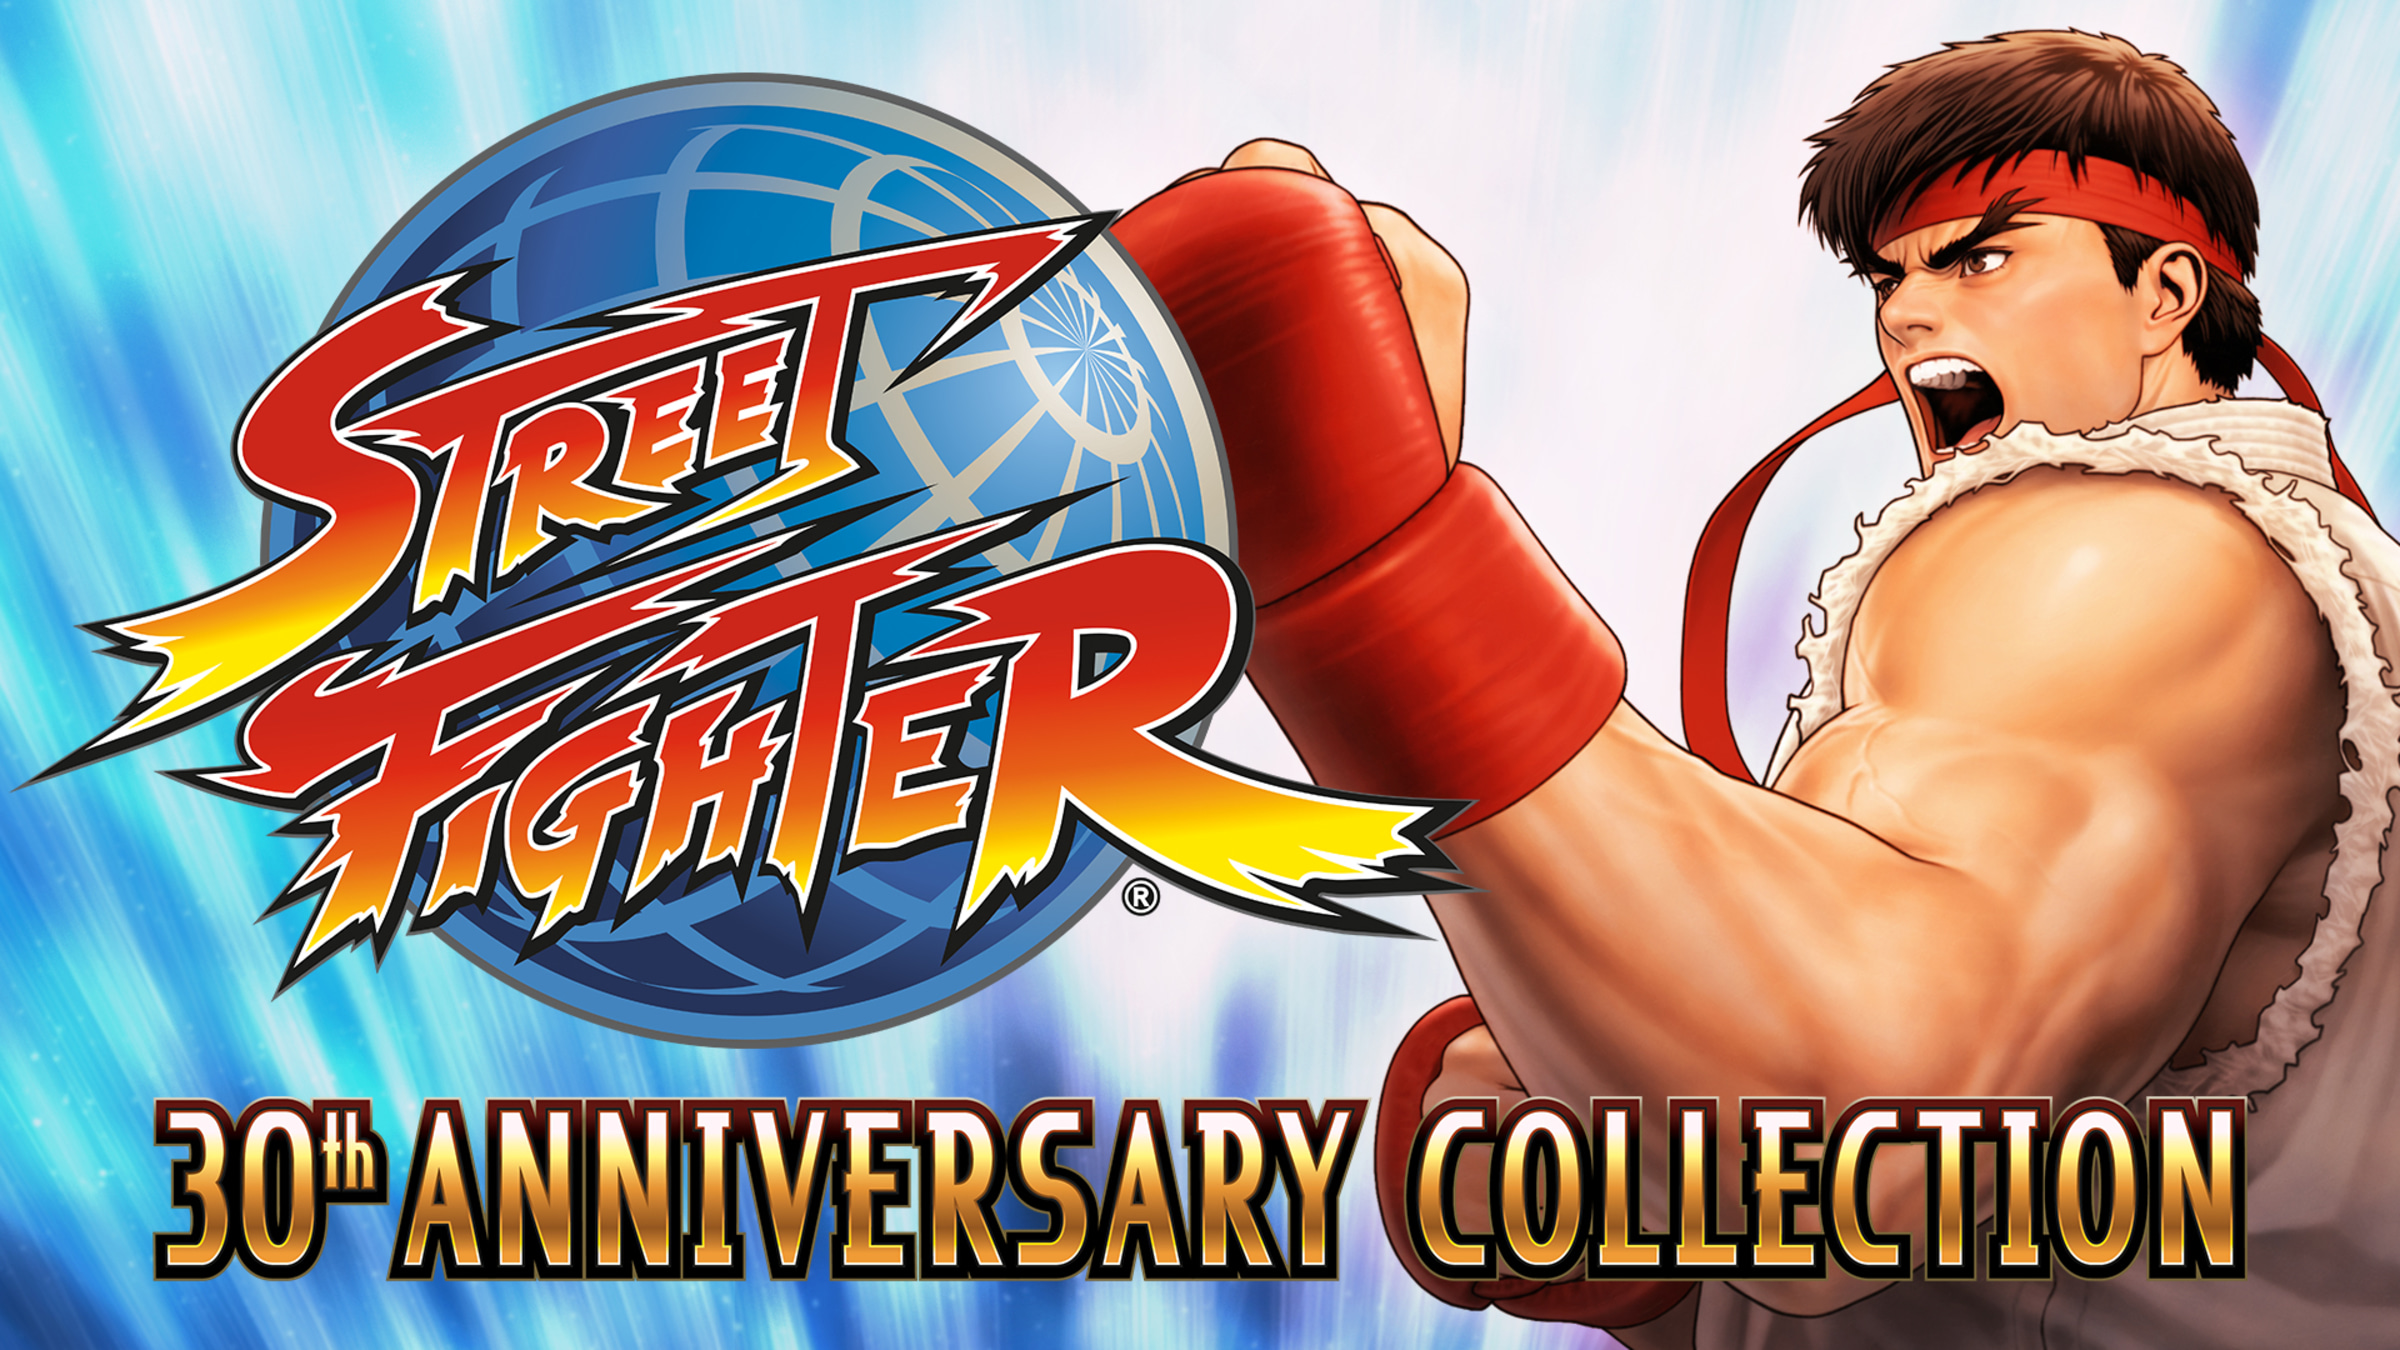 Fighter 30th Anniversary Collection for Nintendo Switch - Nintendo Official Site